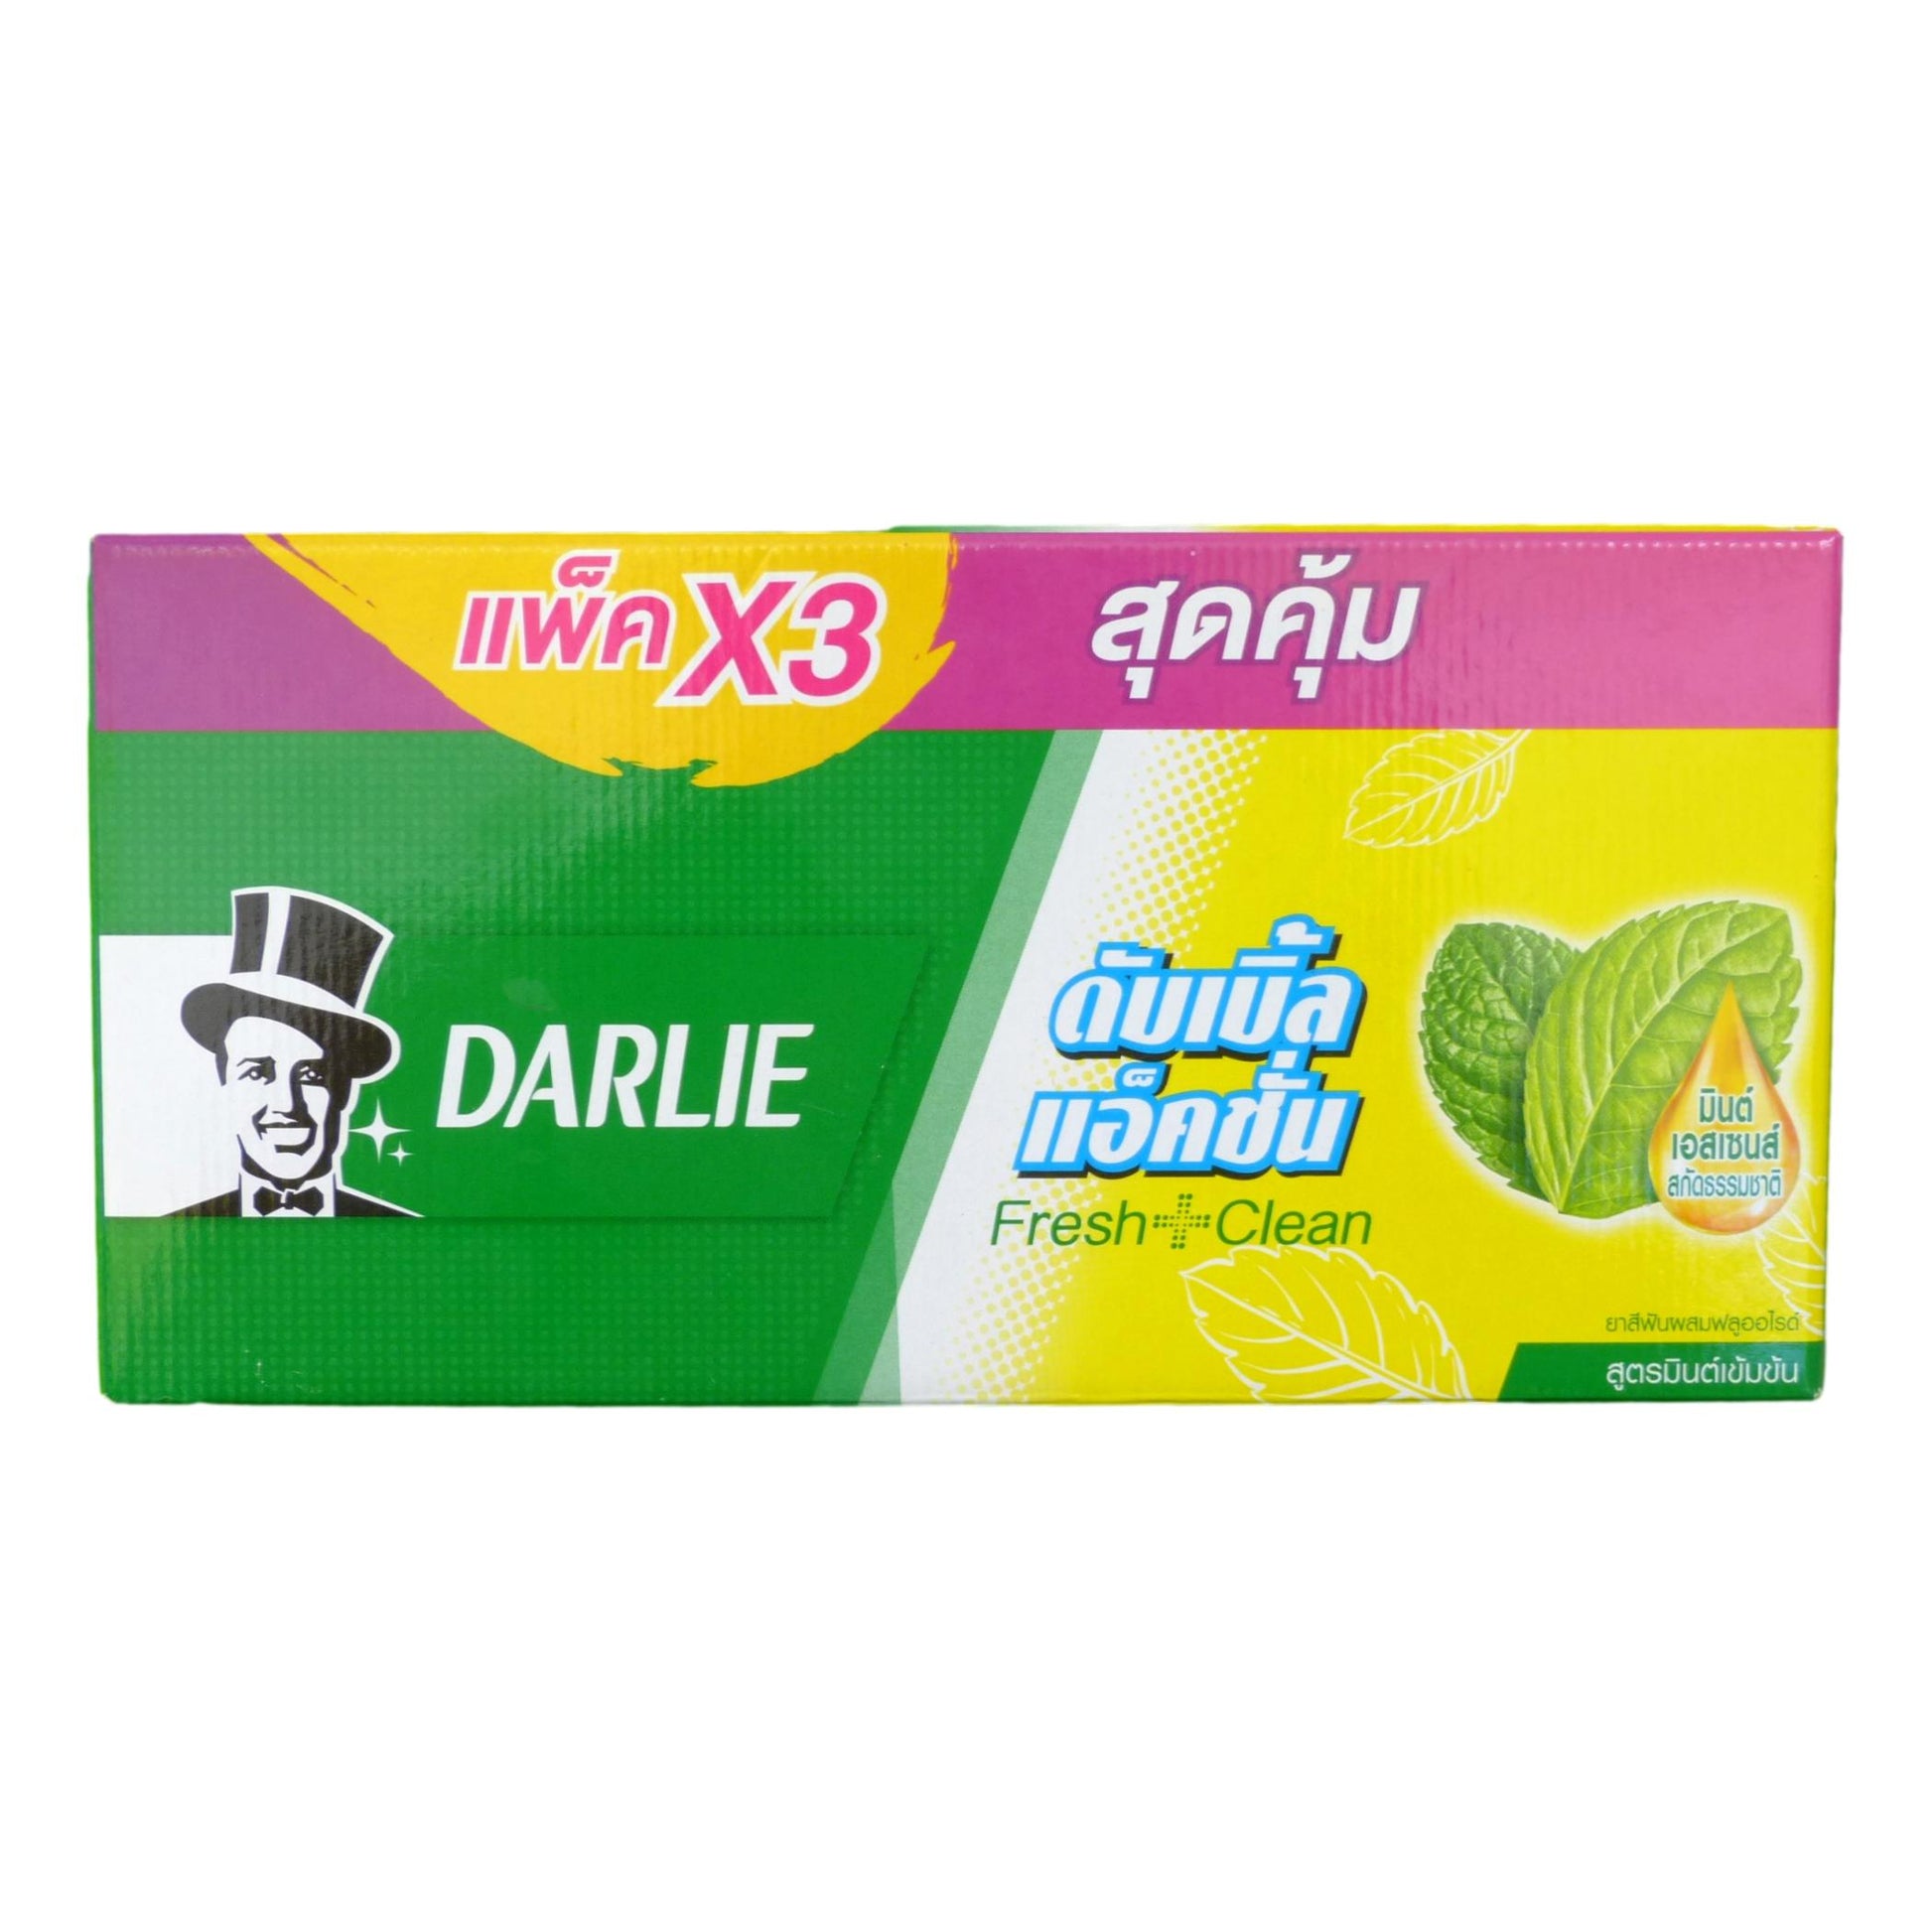 Darlie Double Action Toothpaste Two Mint Powers 150 grams Pack of 3 - Asian Beauty Supply